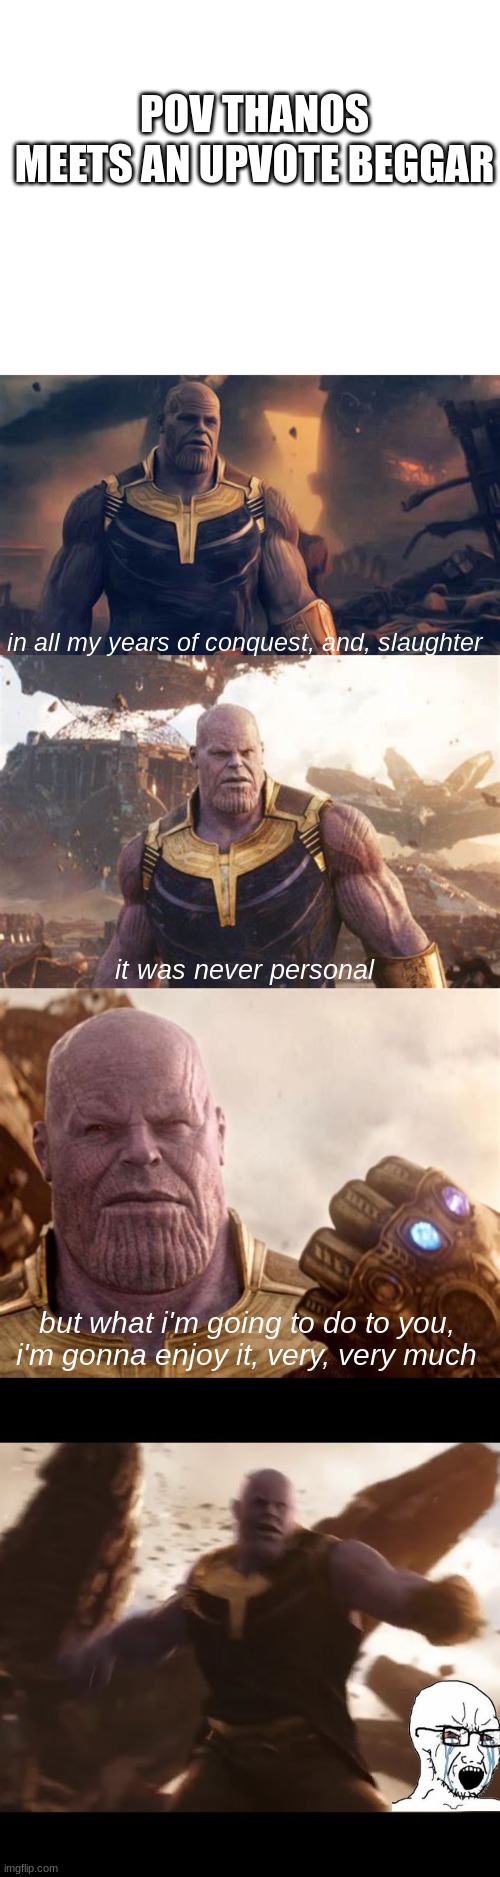 thanos meets upvote beggar | POV THANOS MEETS AN UPVOTE BEGGAR; in all my years of conquest, and, slaughter; it was never personal; but what i'm going to do to you, i'm gonna enjoy it, very, very much | image tagged in no upvote beggars | made w/ Imgflip meme maker